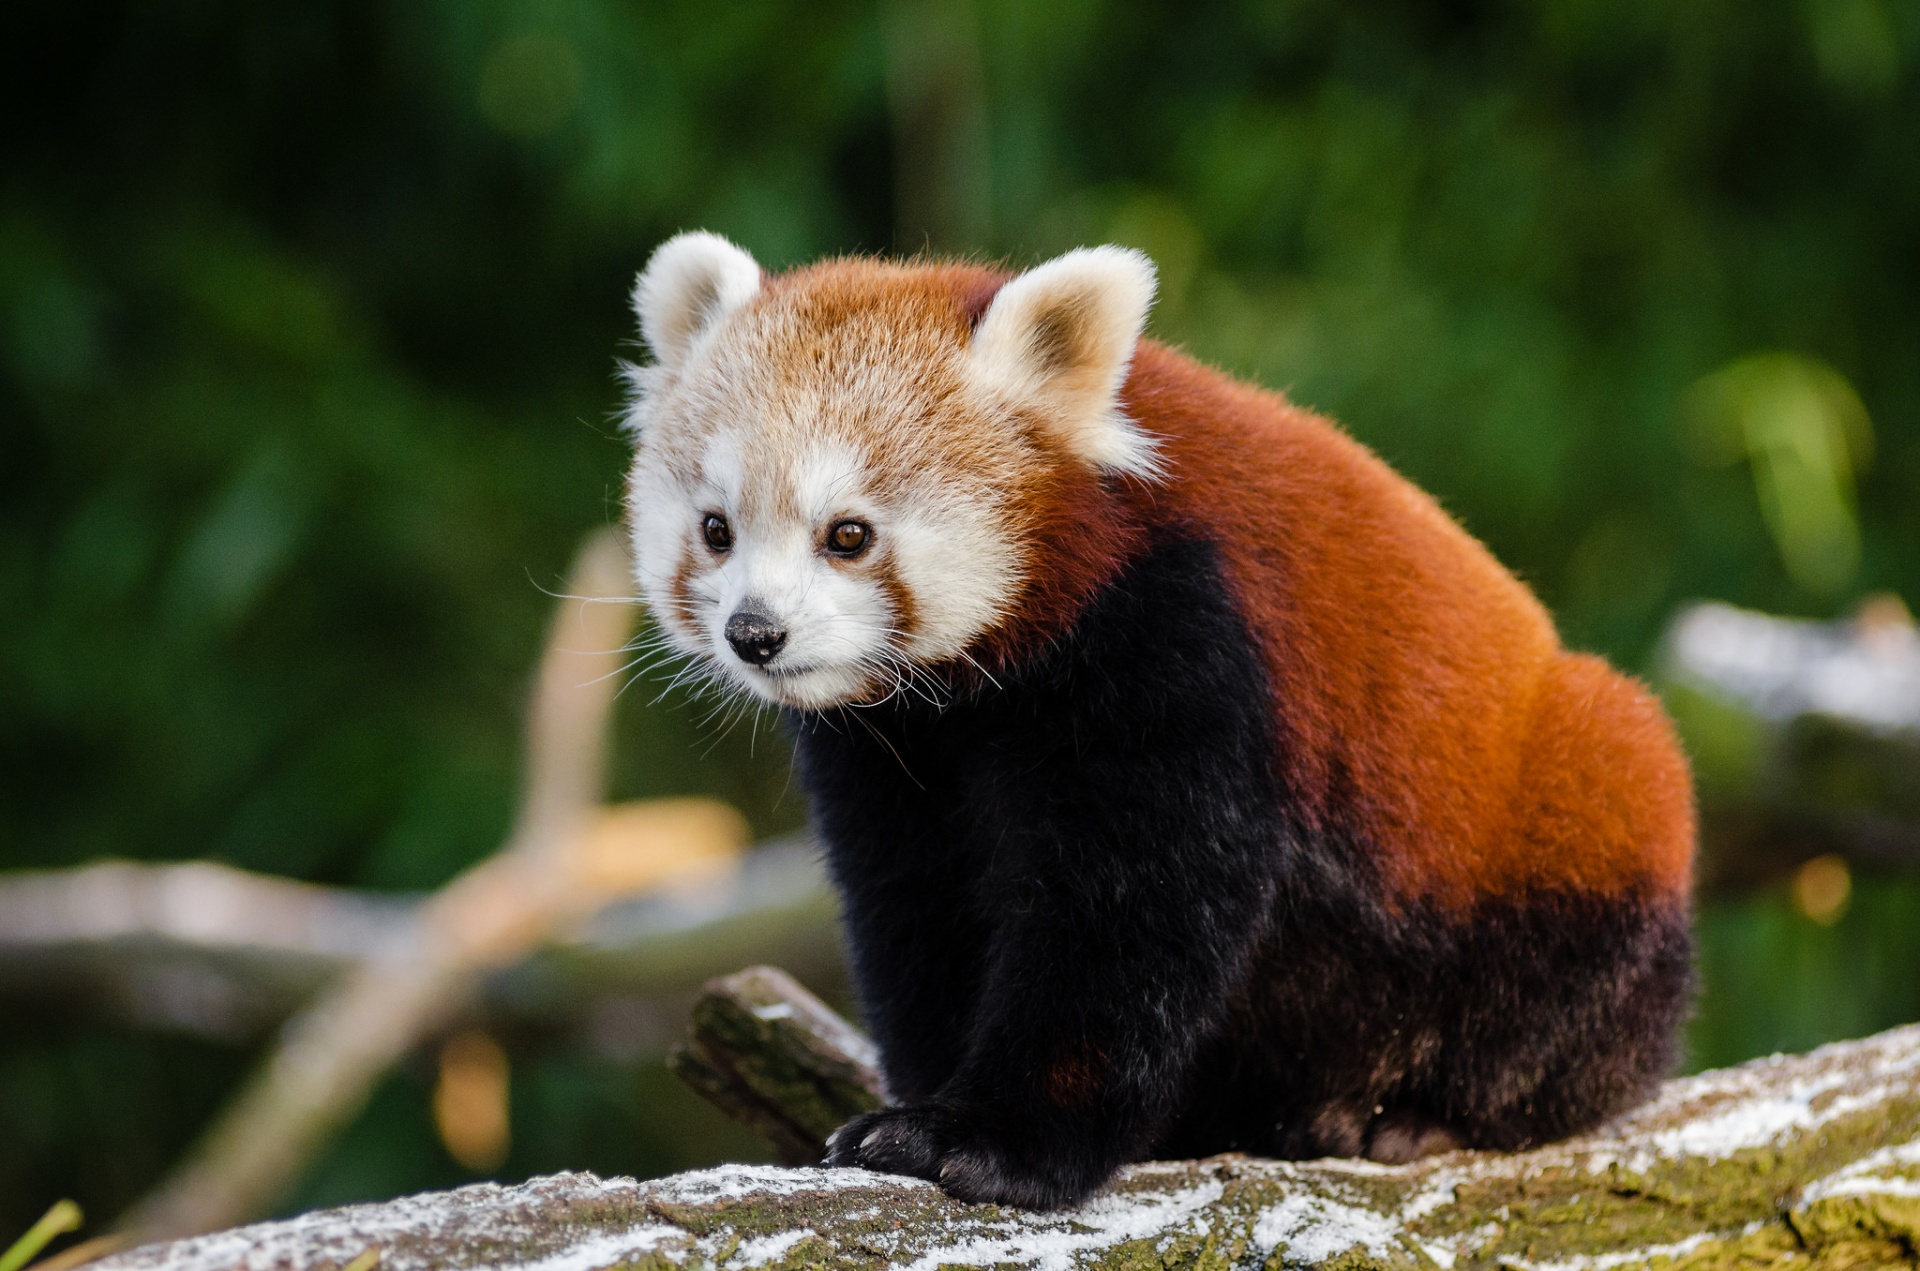 Suzy's Animals of the World Blog: THE RED PANDAS